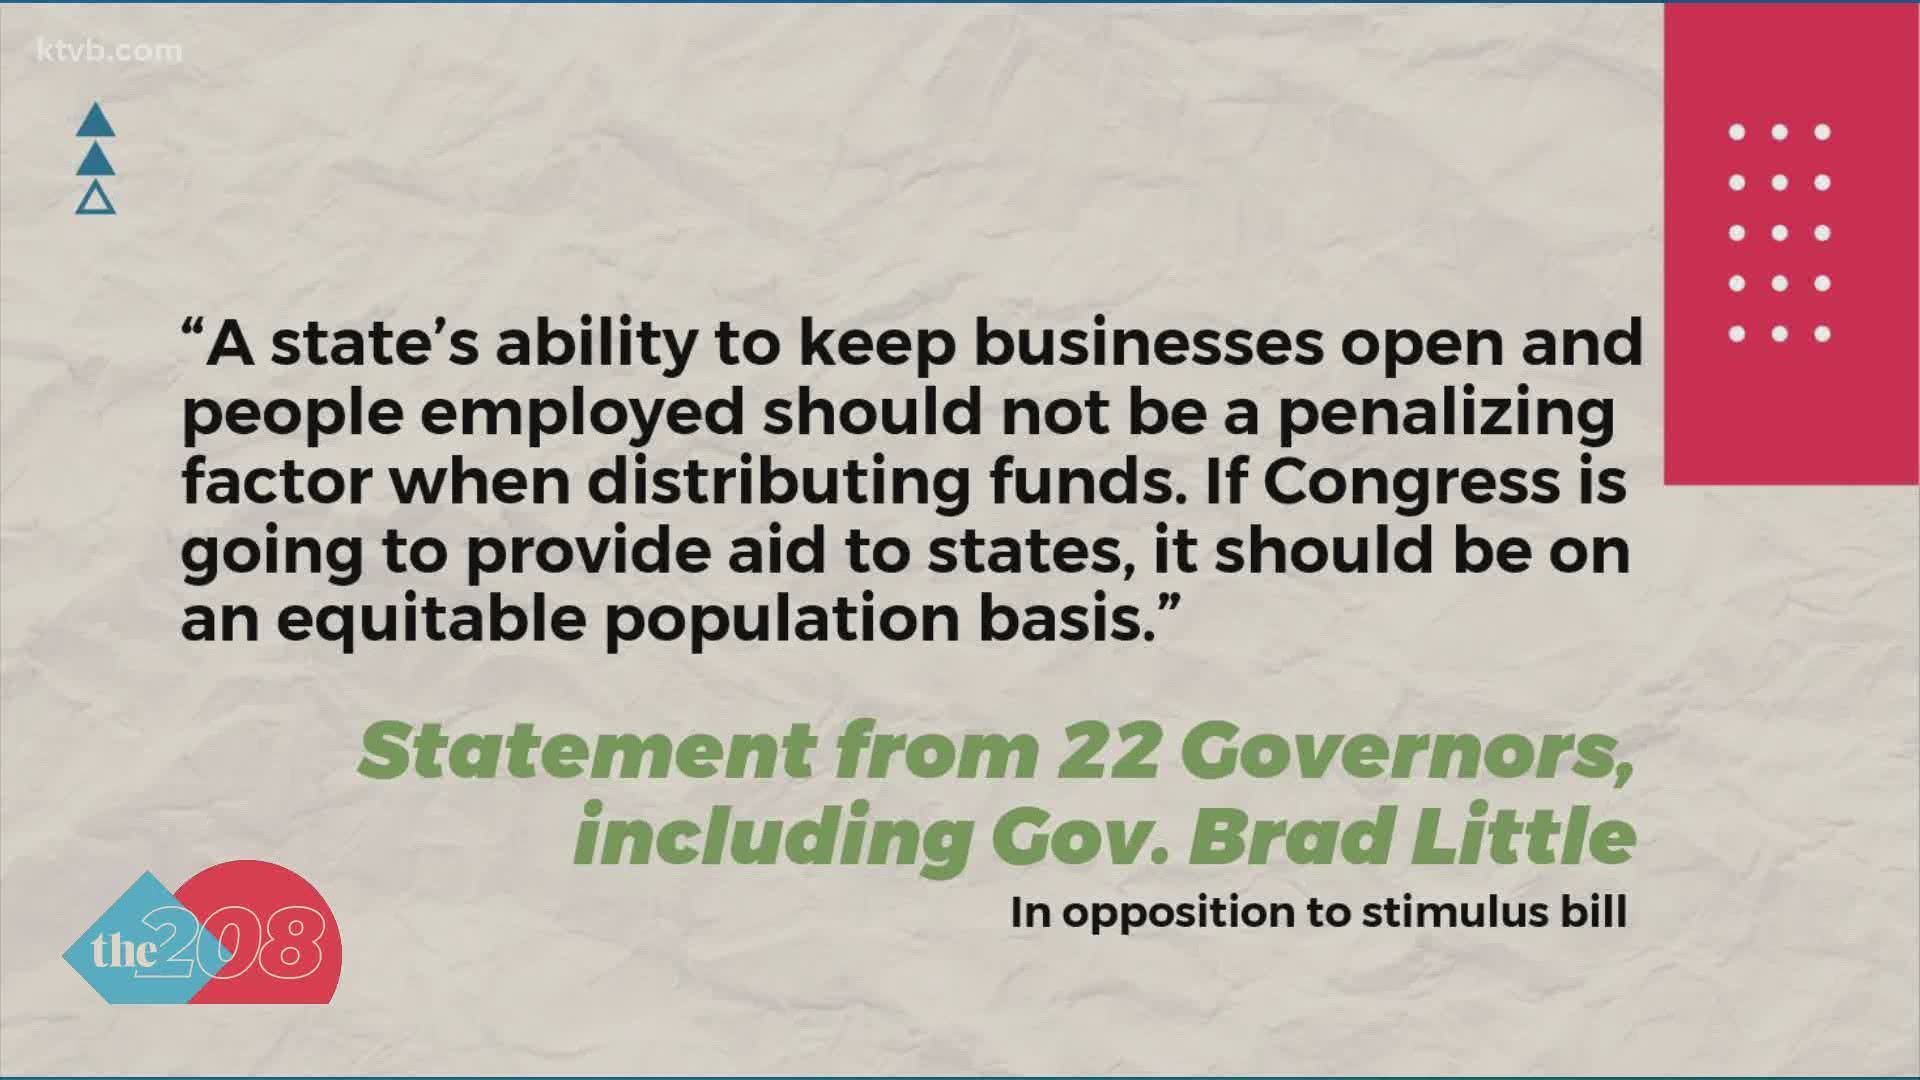 In a press release, the governor claimed the proposed bill would punish states like Idaho for remaining open during the pandemic.